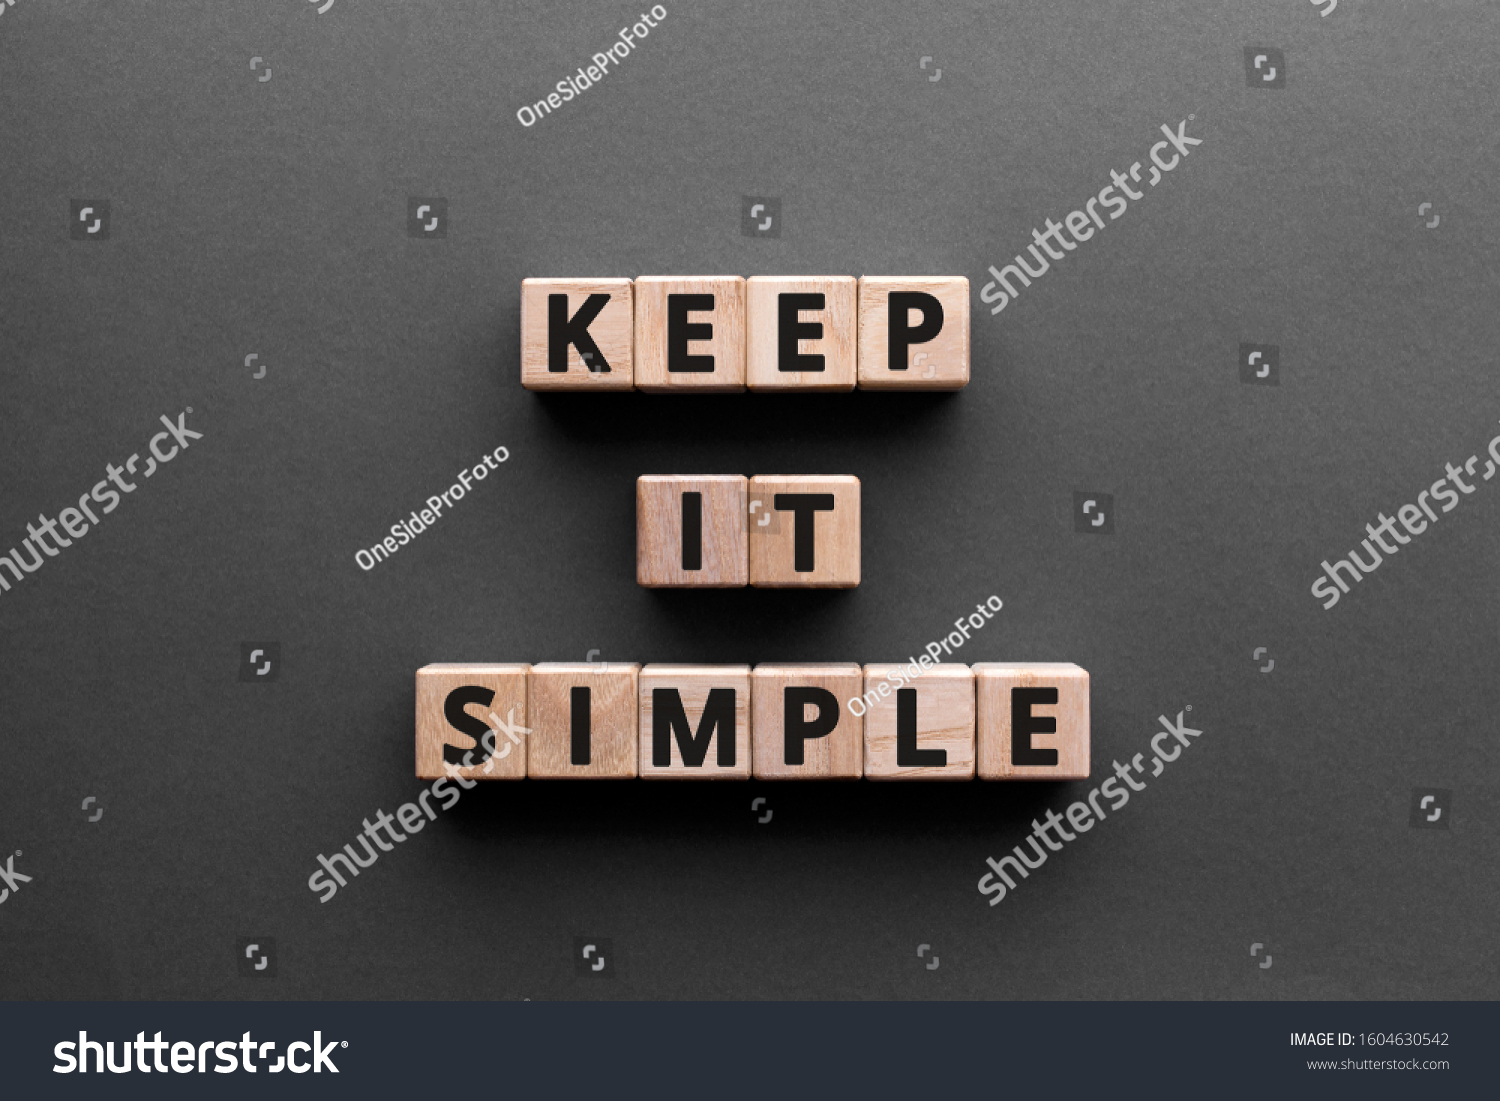 Keep it simple - word from wooden blocks with letters, to make something easy, keep it simple concept, gray background #1604630542